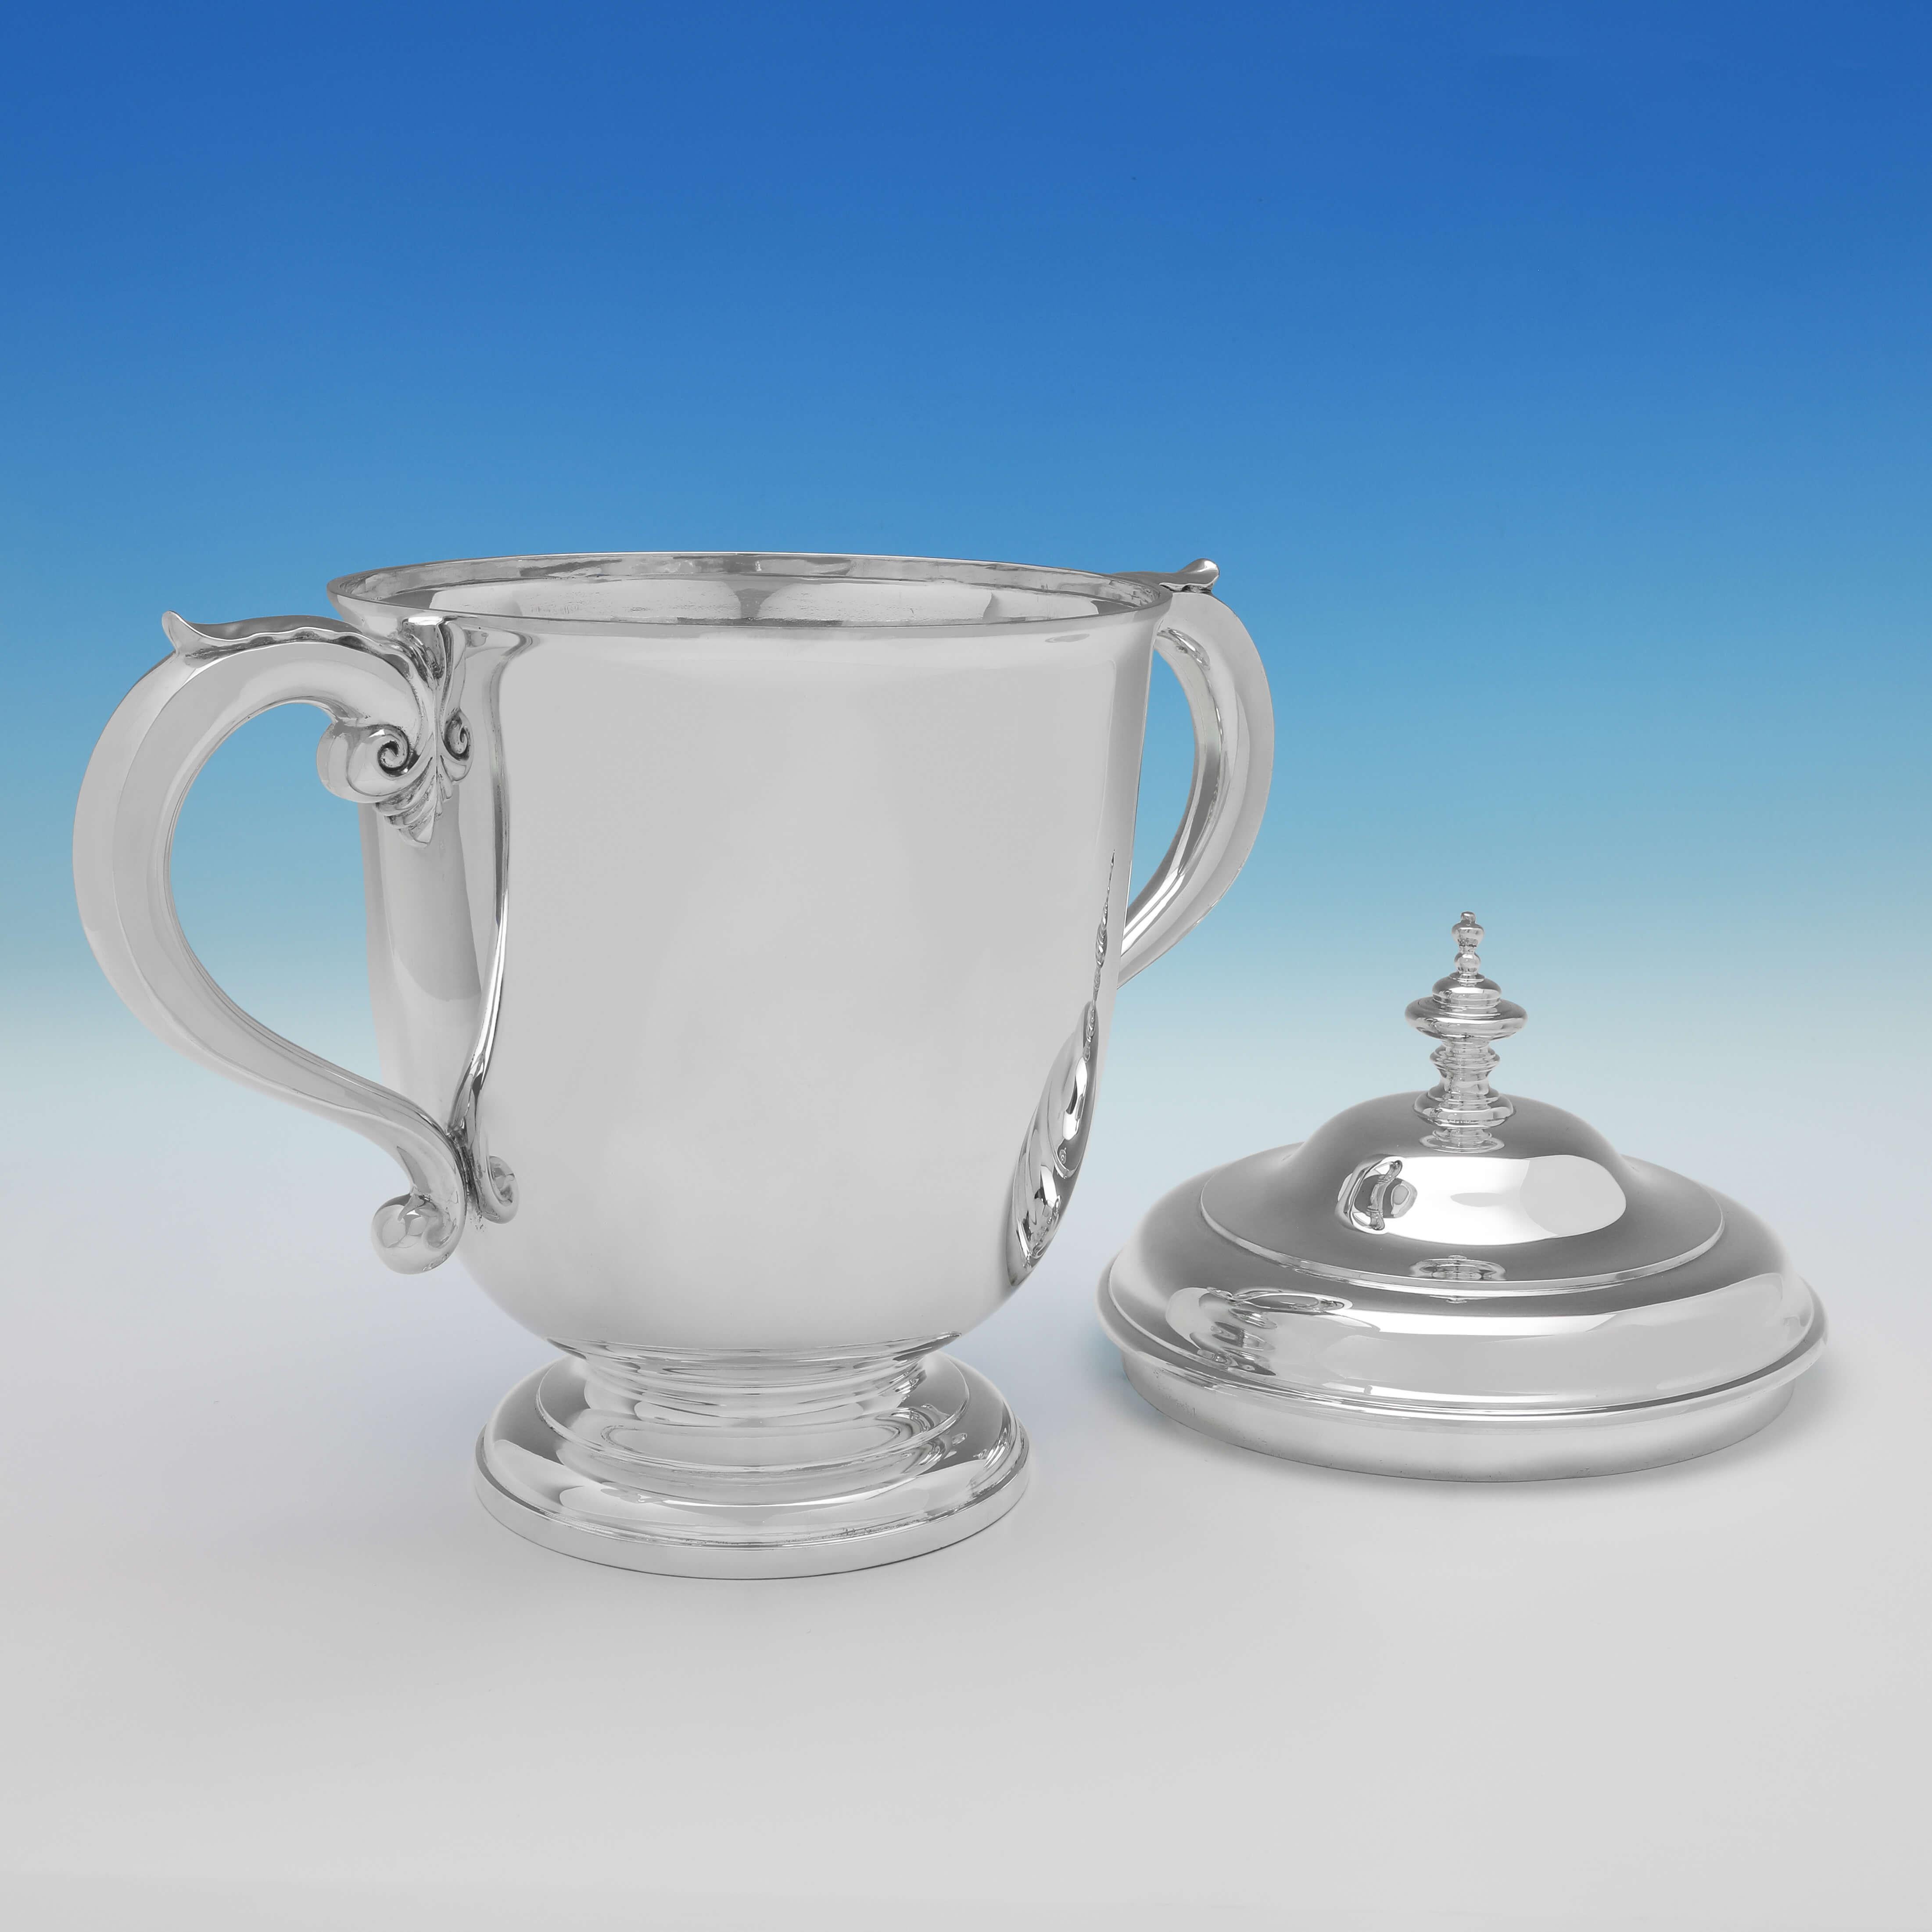 Hallmarked in London in 1935 by Mappin & Webb, this very handsome, large, sterling silver trophy, features acanthus detailed handles, and is otherwise plain in style. The trophy measures: 15